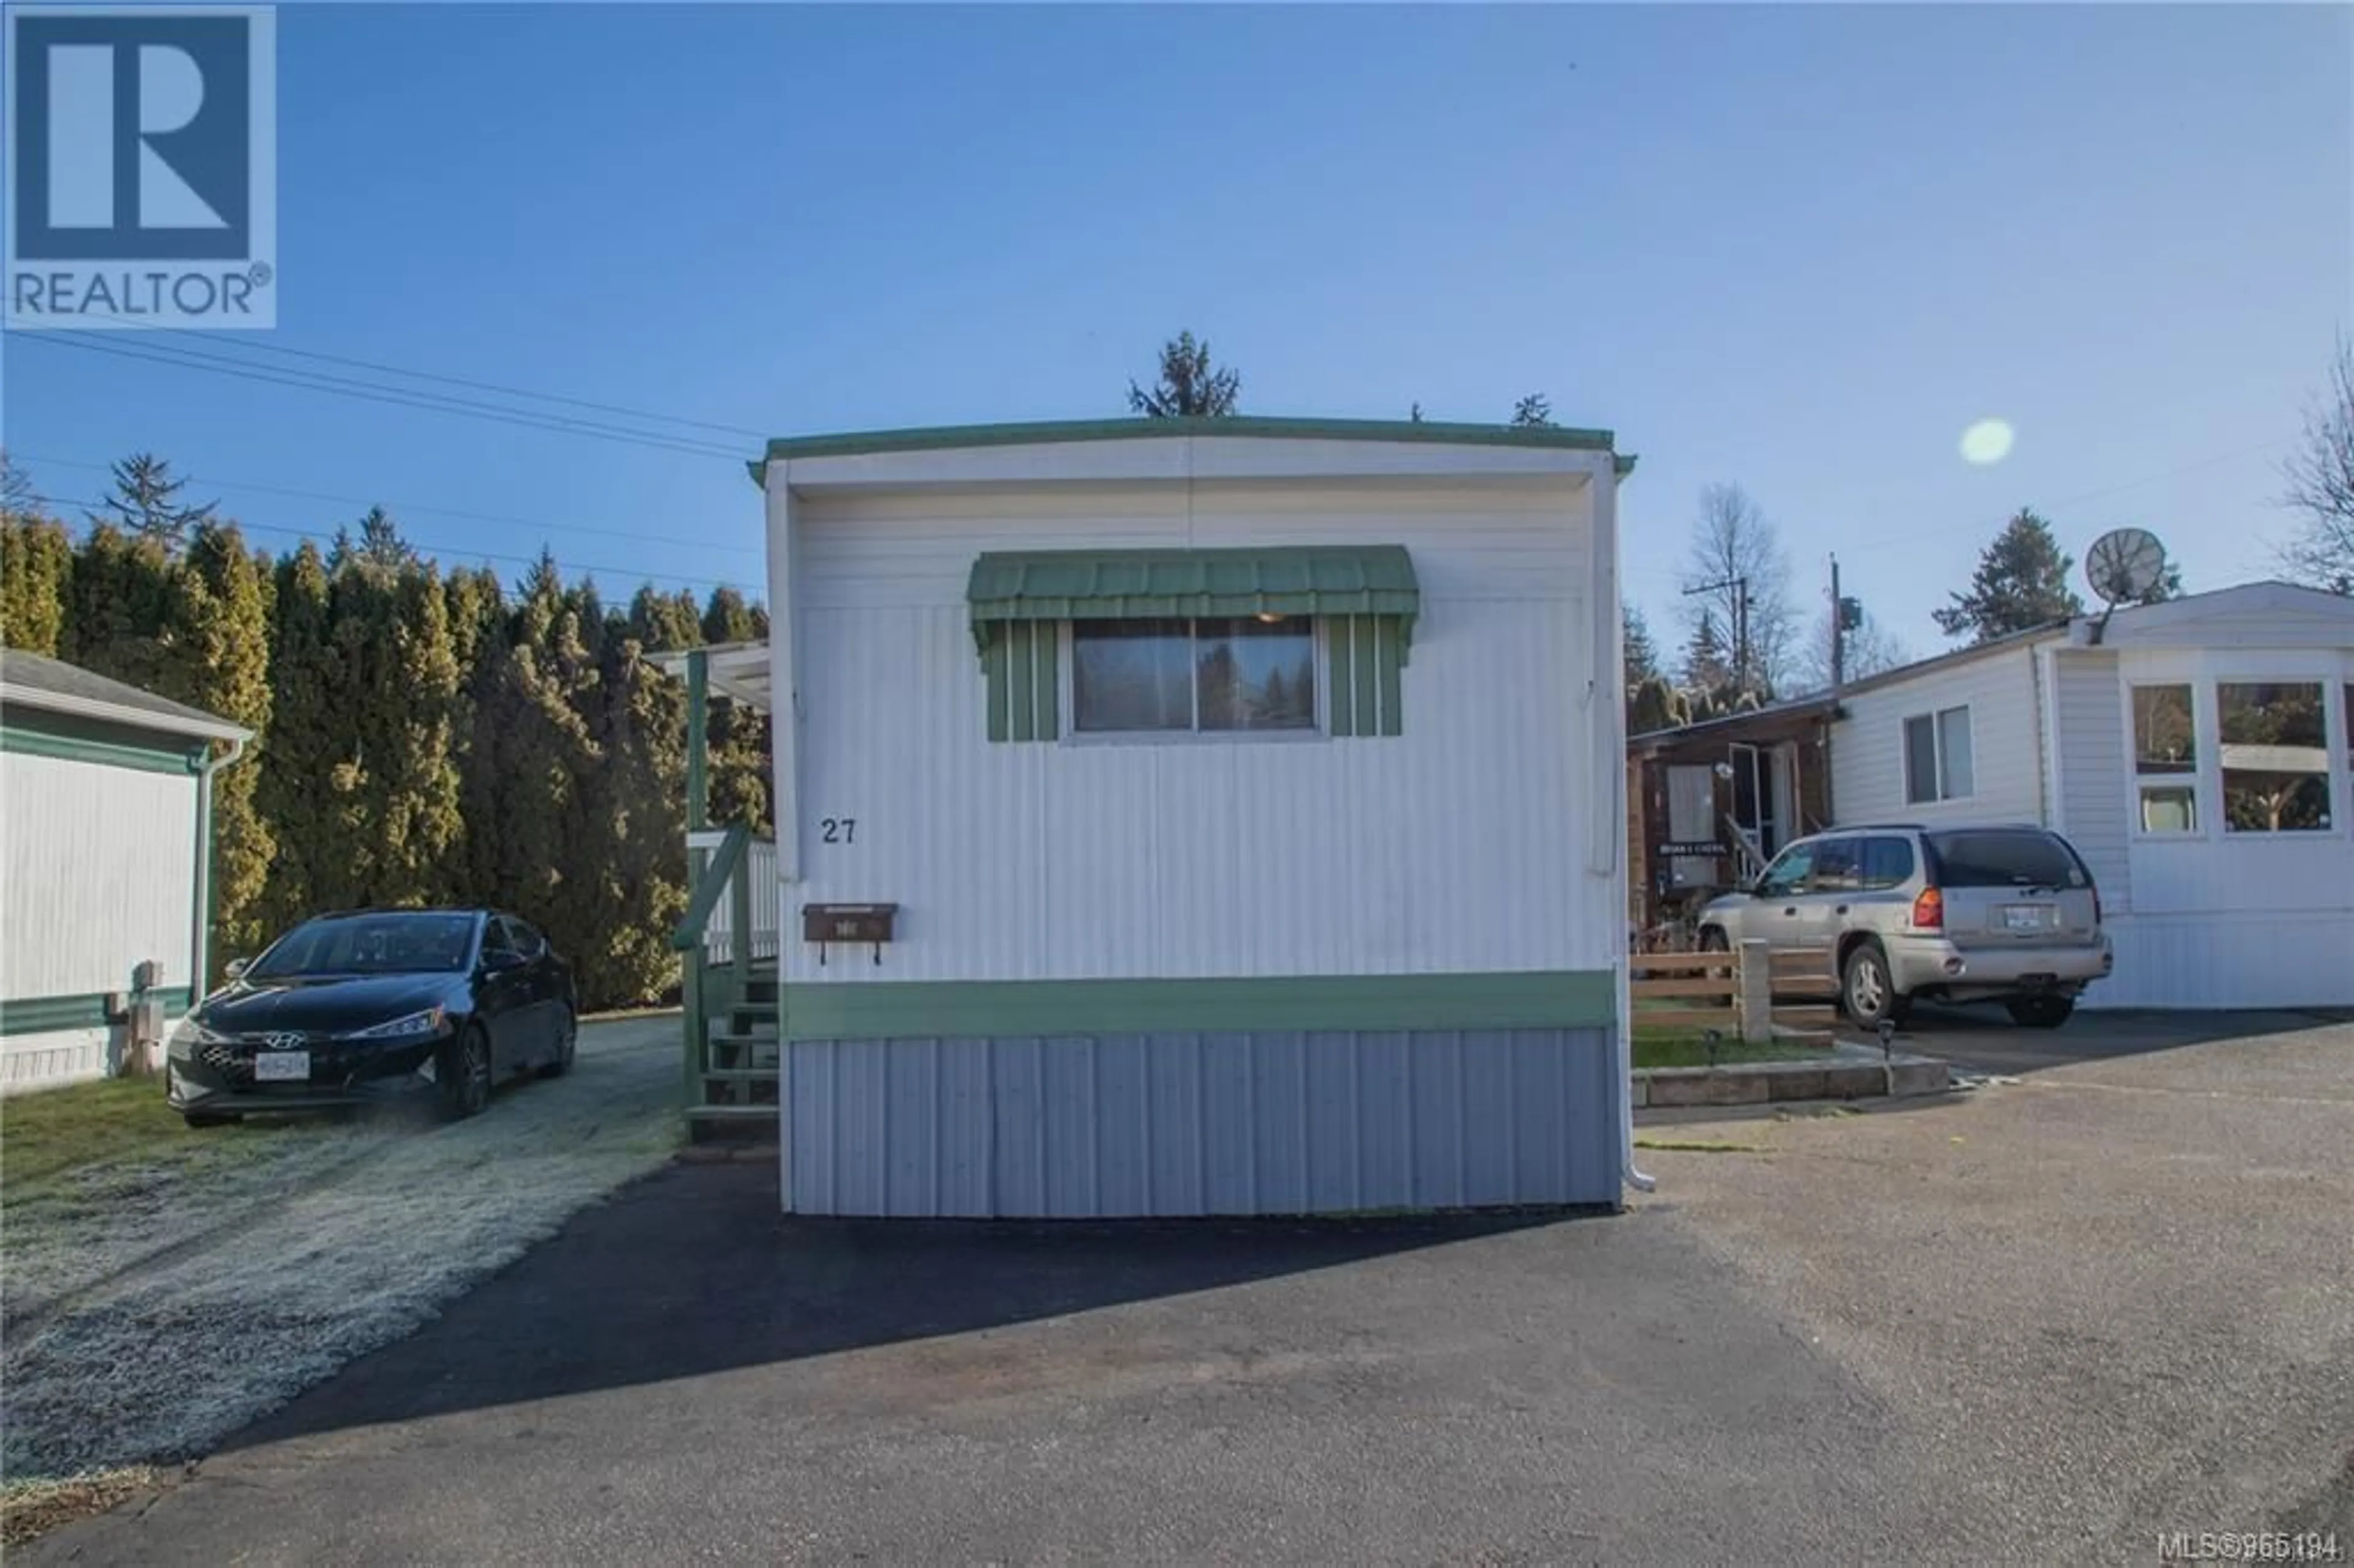 Shed for 27 951 Homewood Rd, Campbell River British Columbia V9W3N7